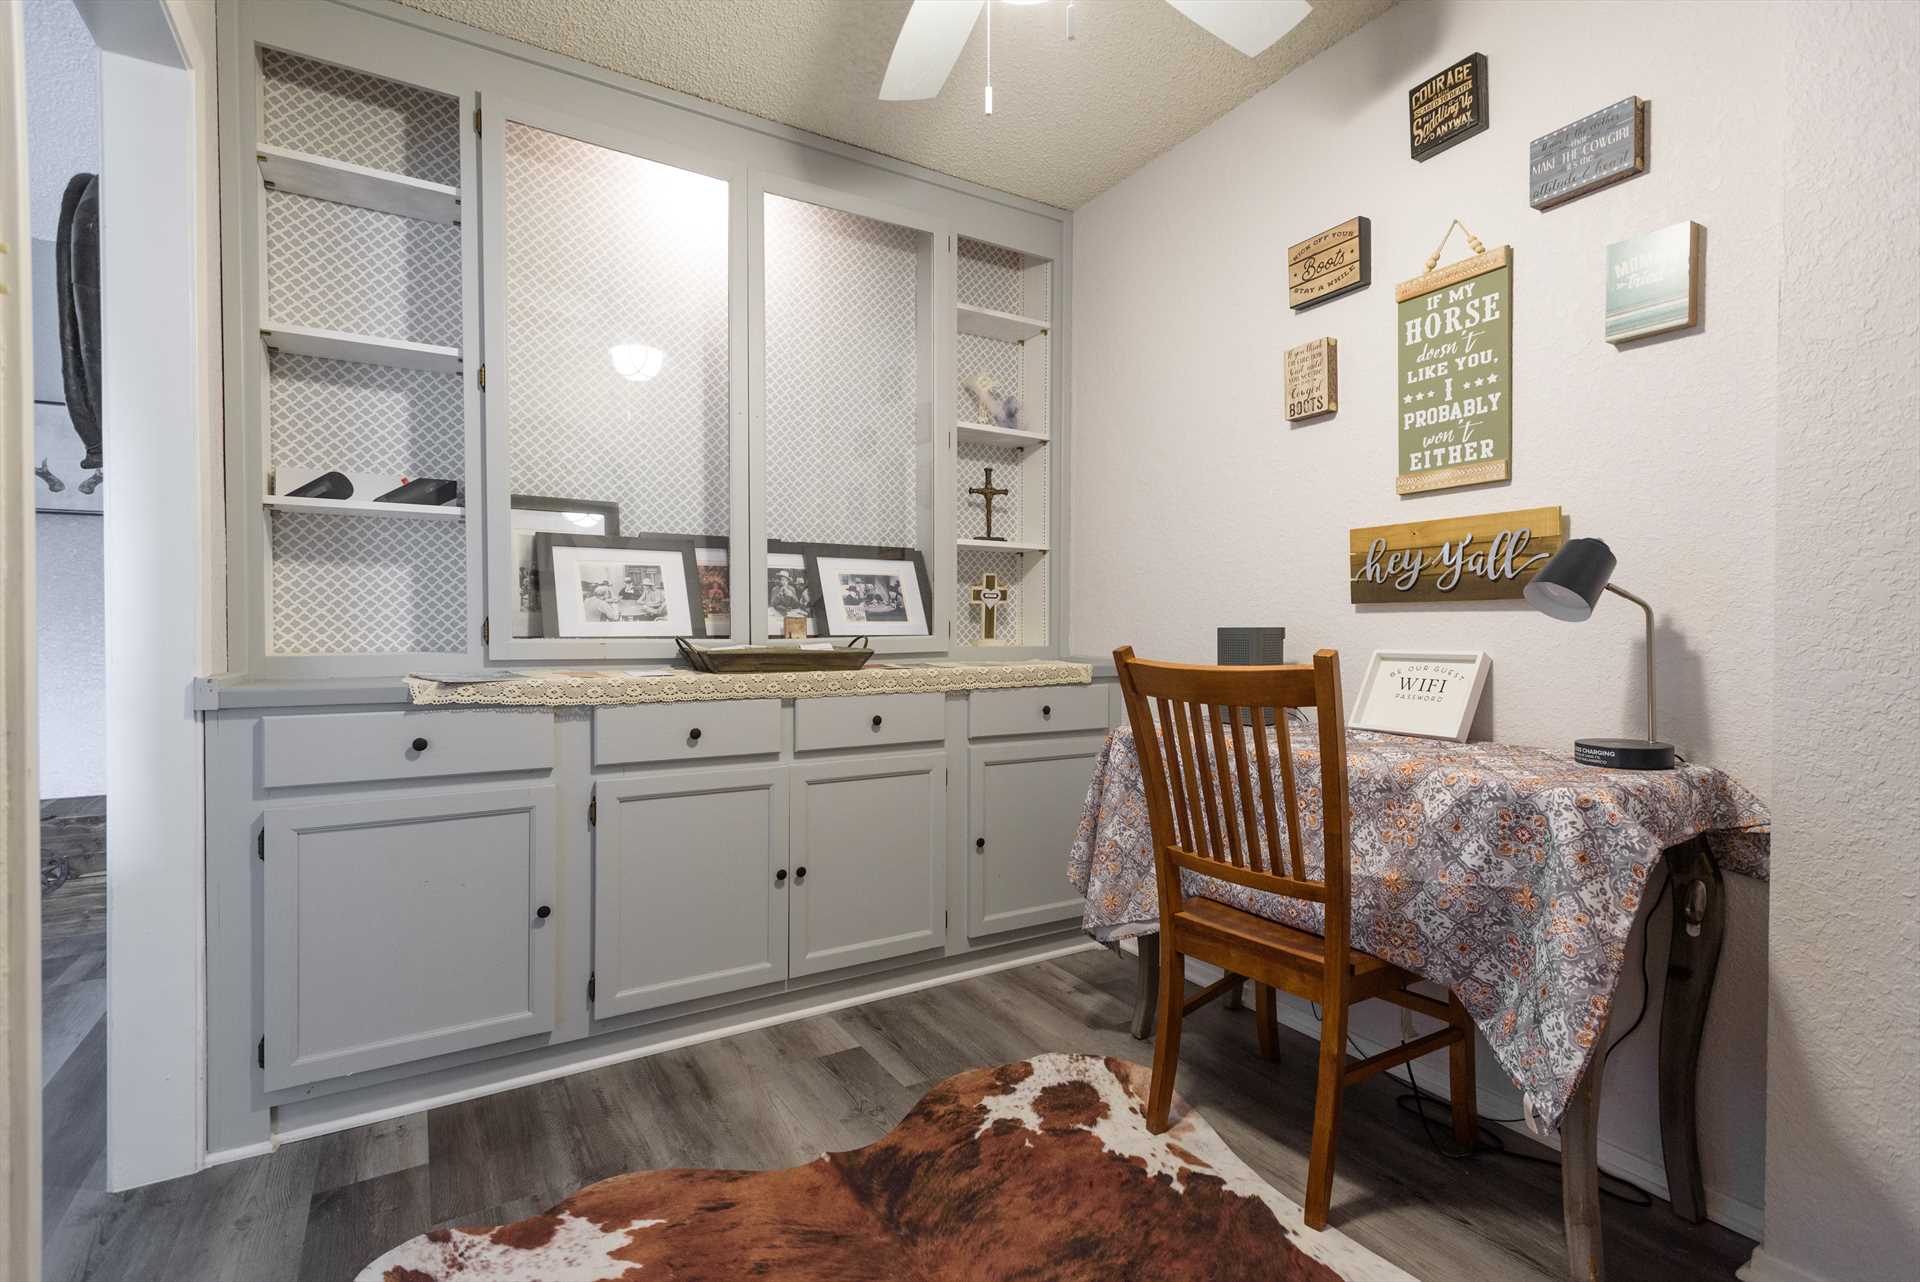                                                 With Wifi Internet service in the house, and a dedicated workspace area, you'll have no problems staying connected during your Hill Country holiday!